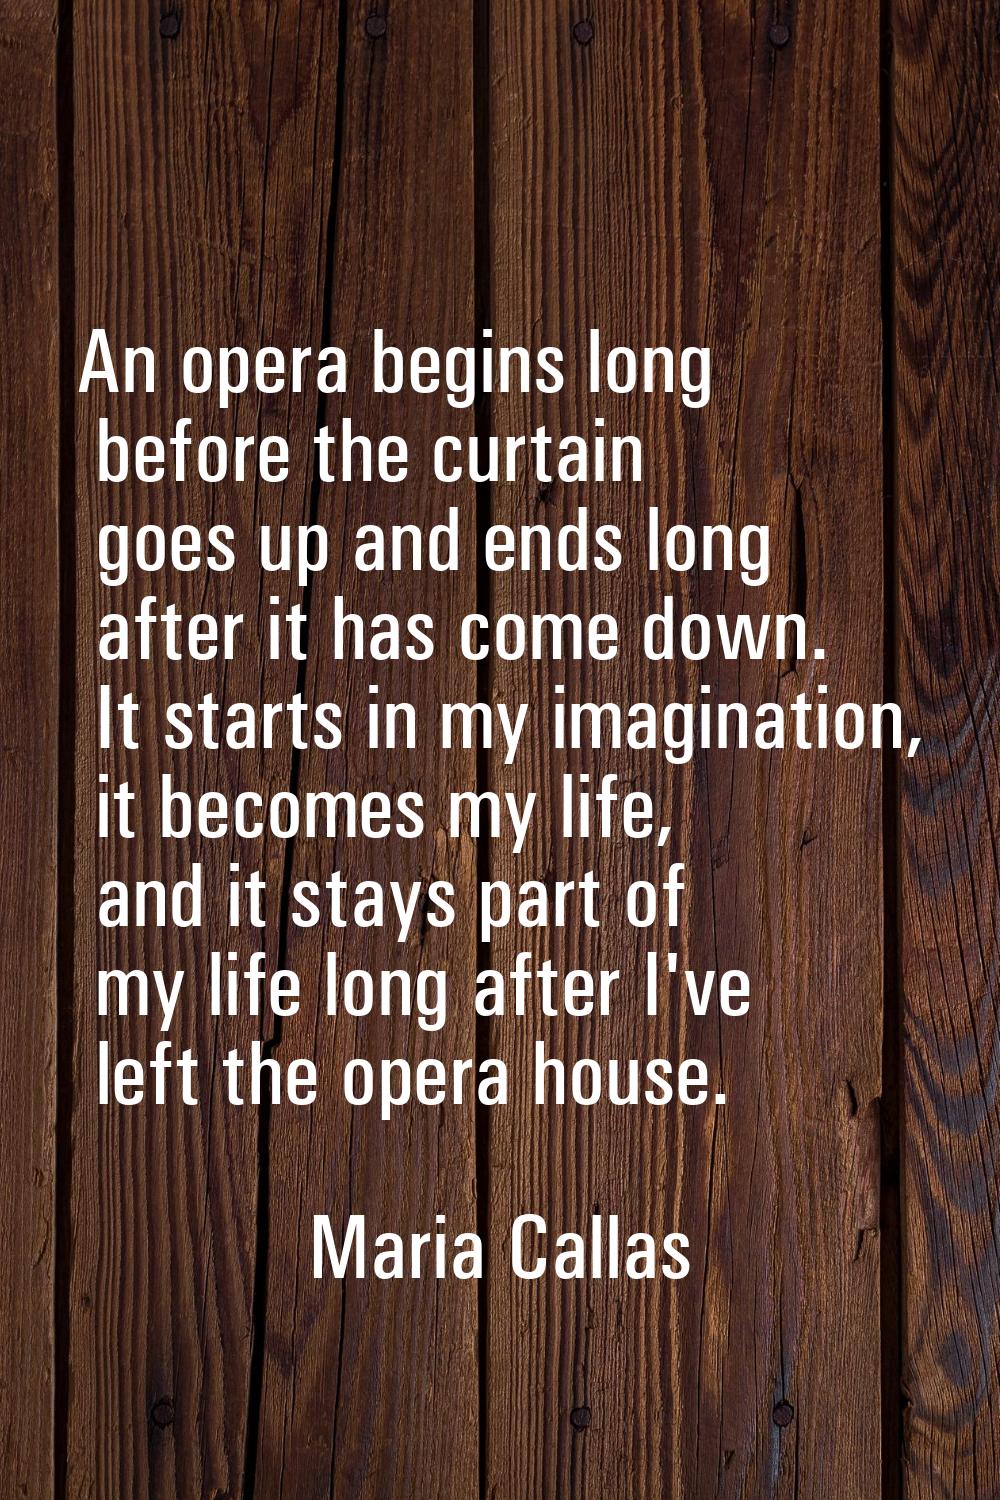 An opera begins long before the curtain goes up and ends long after it has come down. It starts in 